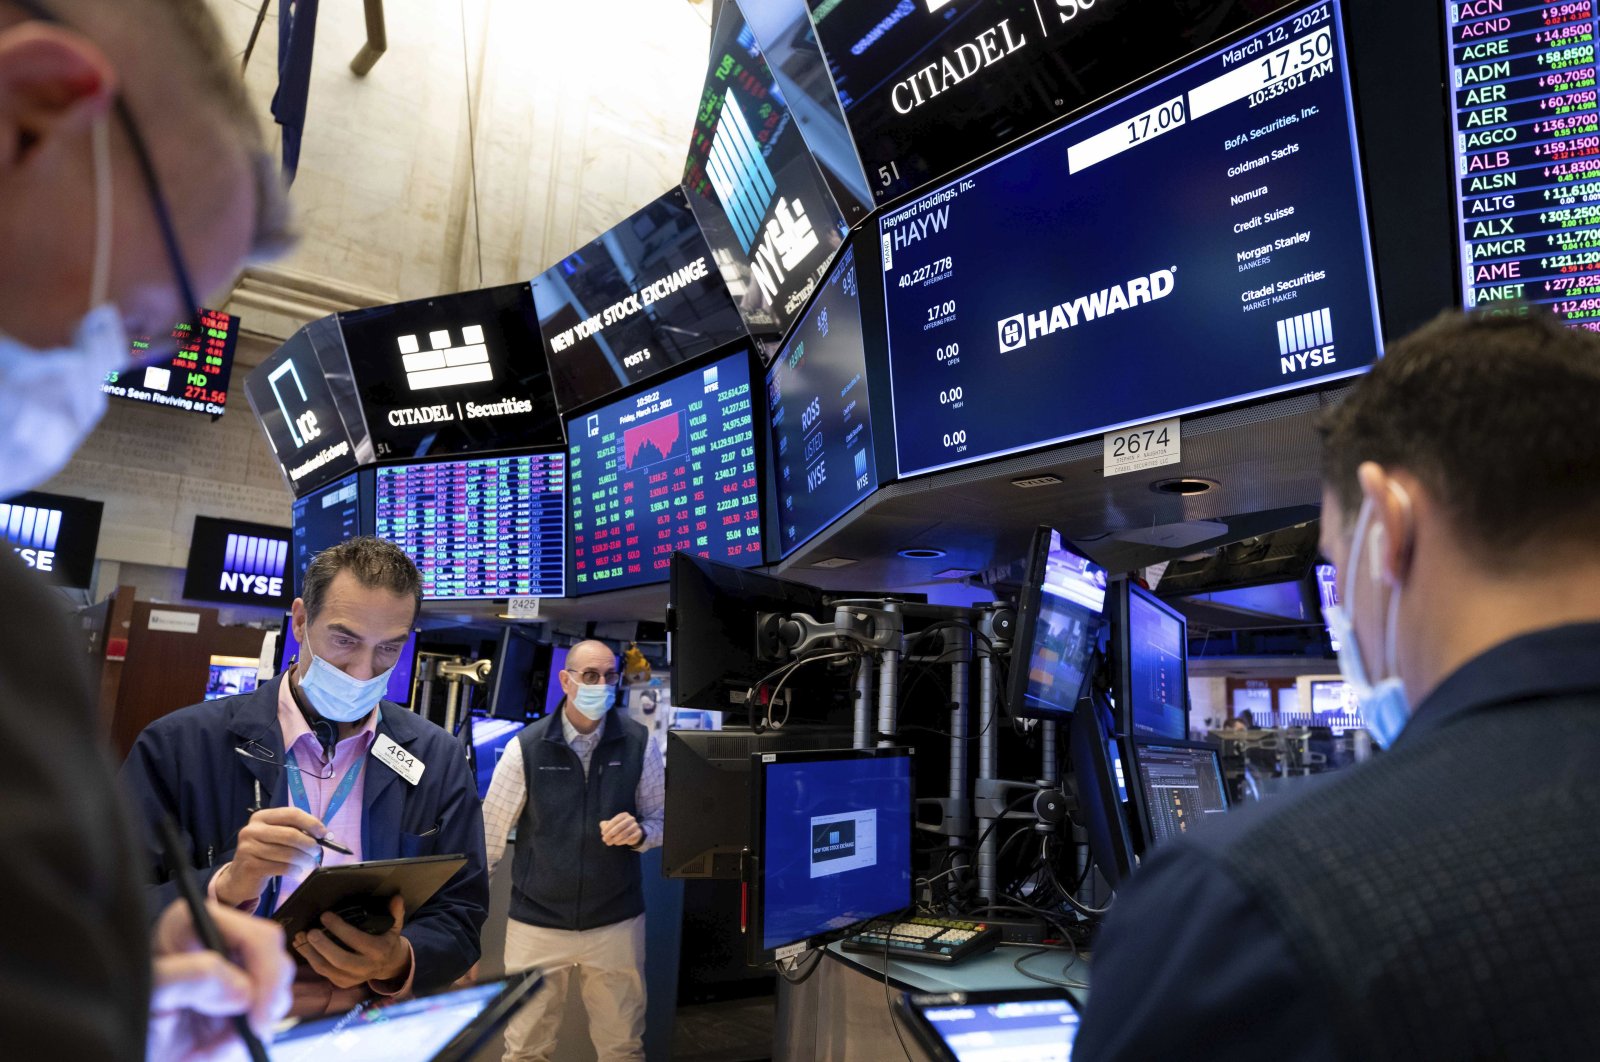 Traders work on the trading floor of the New York Stock Exchange in New York City, March 12, 2021. (NYSE via AP)